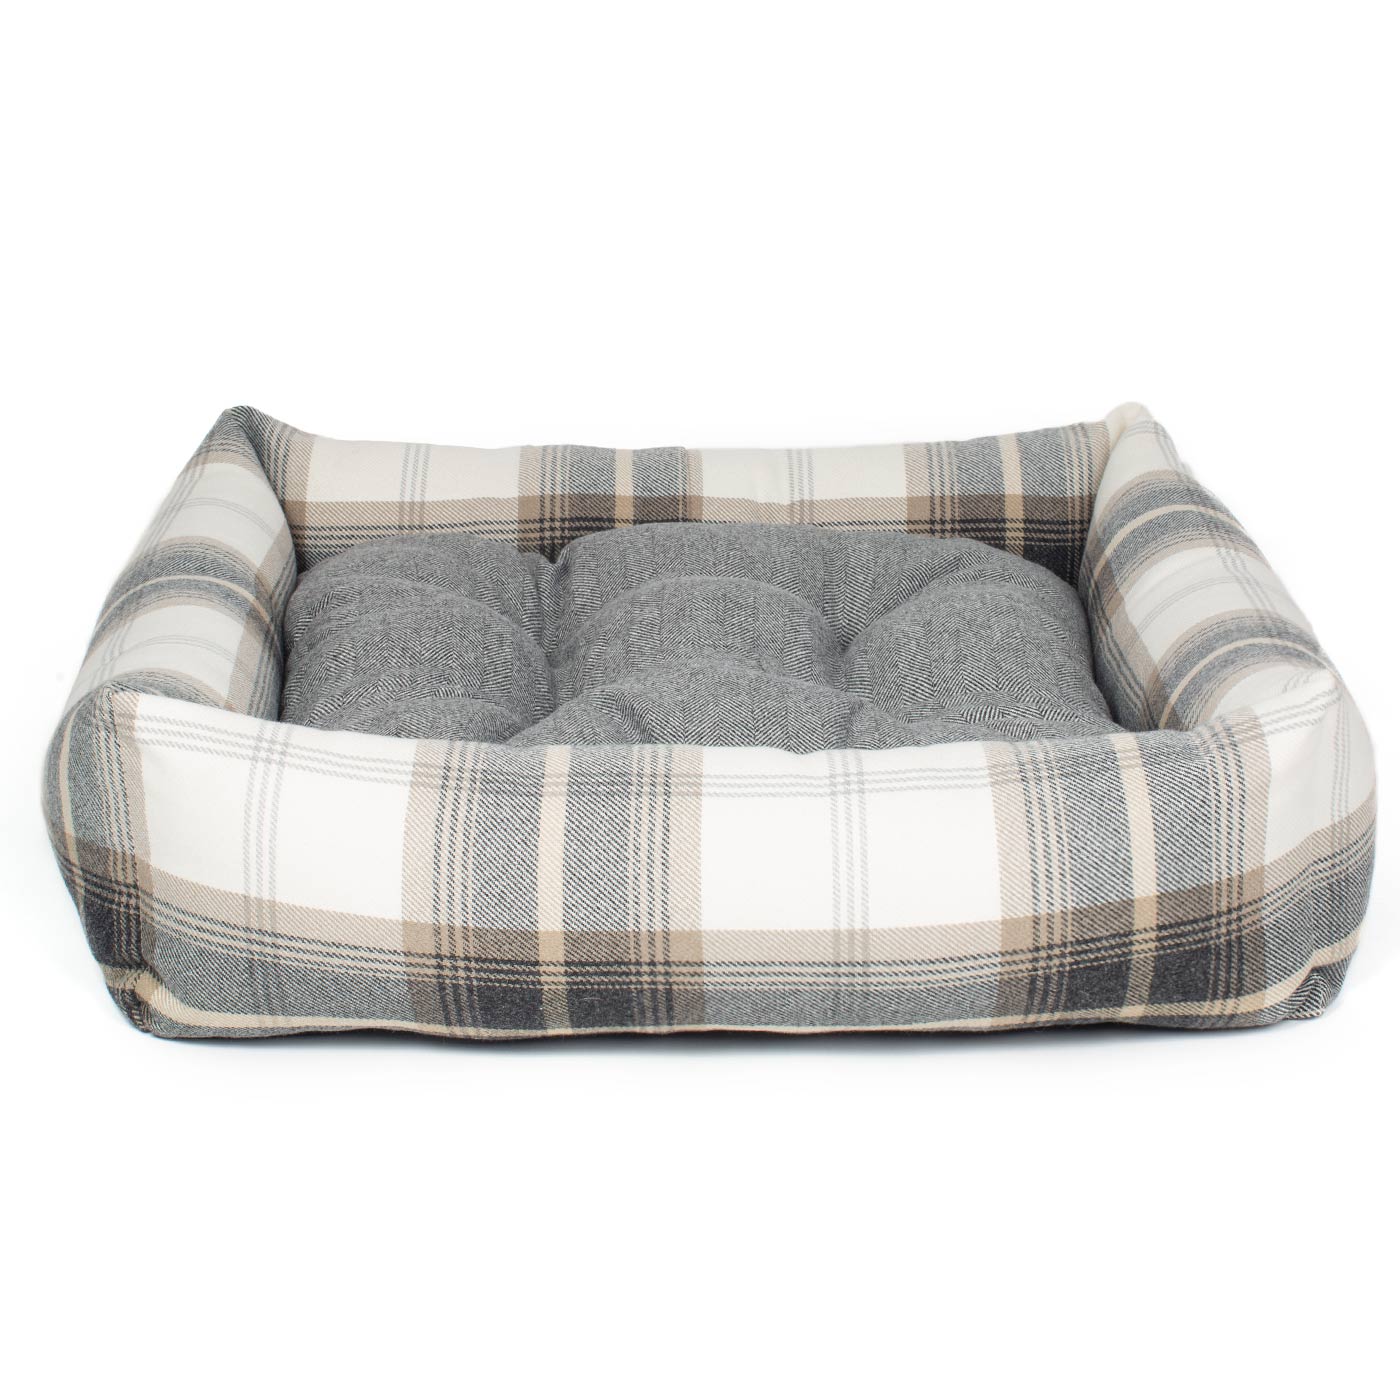 Luxury Handmade Box Bed For Dogs in Balmoral Charcoal Tweed, Perfect For Your Pets Nap Time! Available To Personalize at Lords & Labradors US